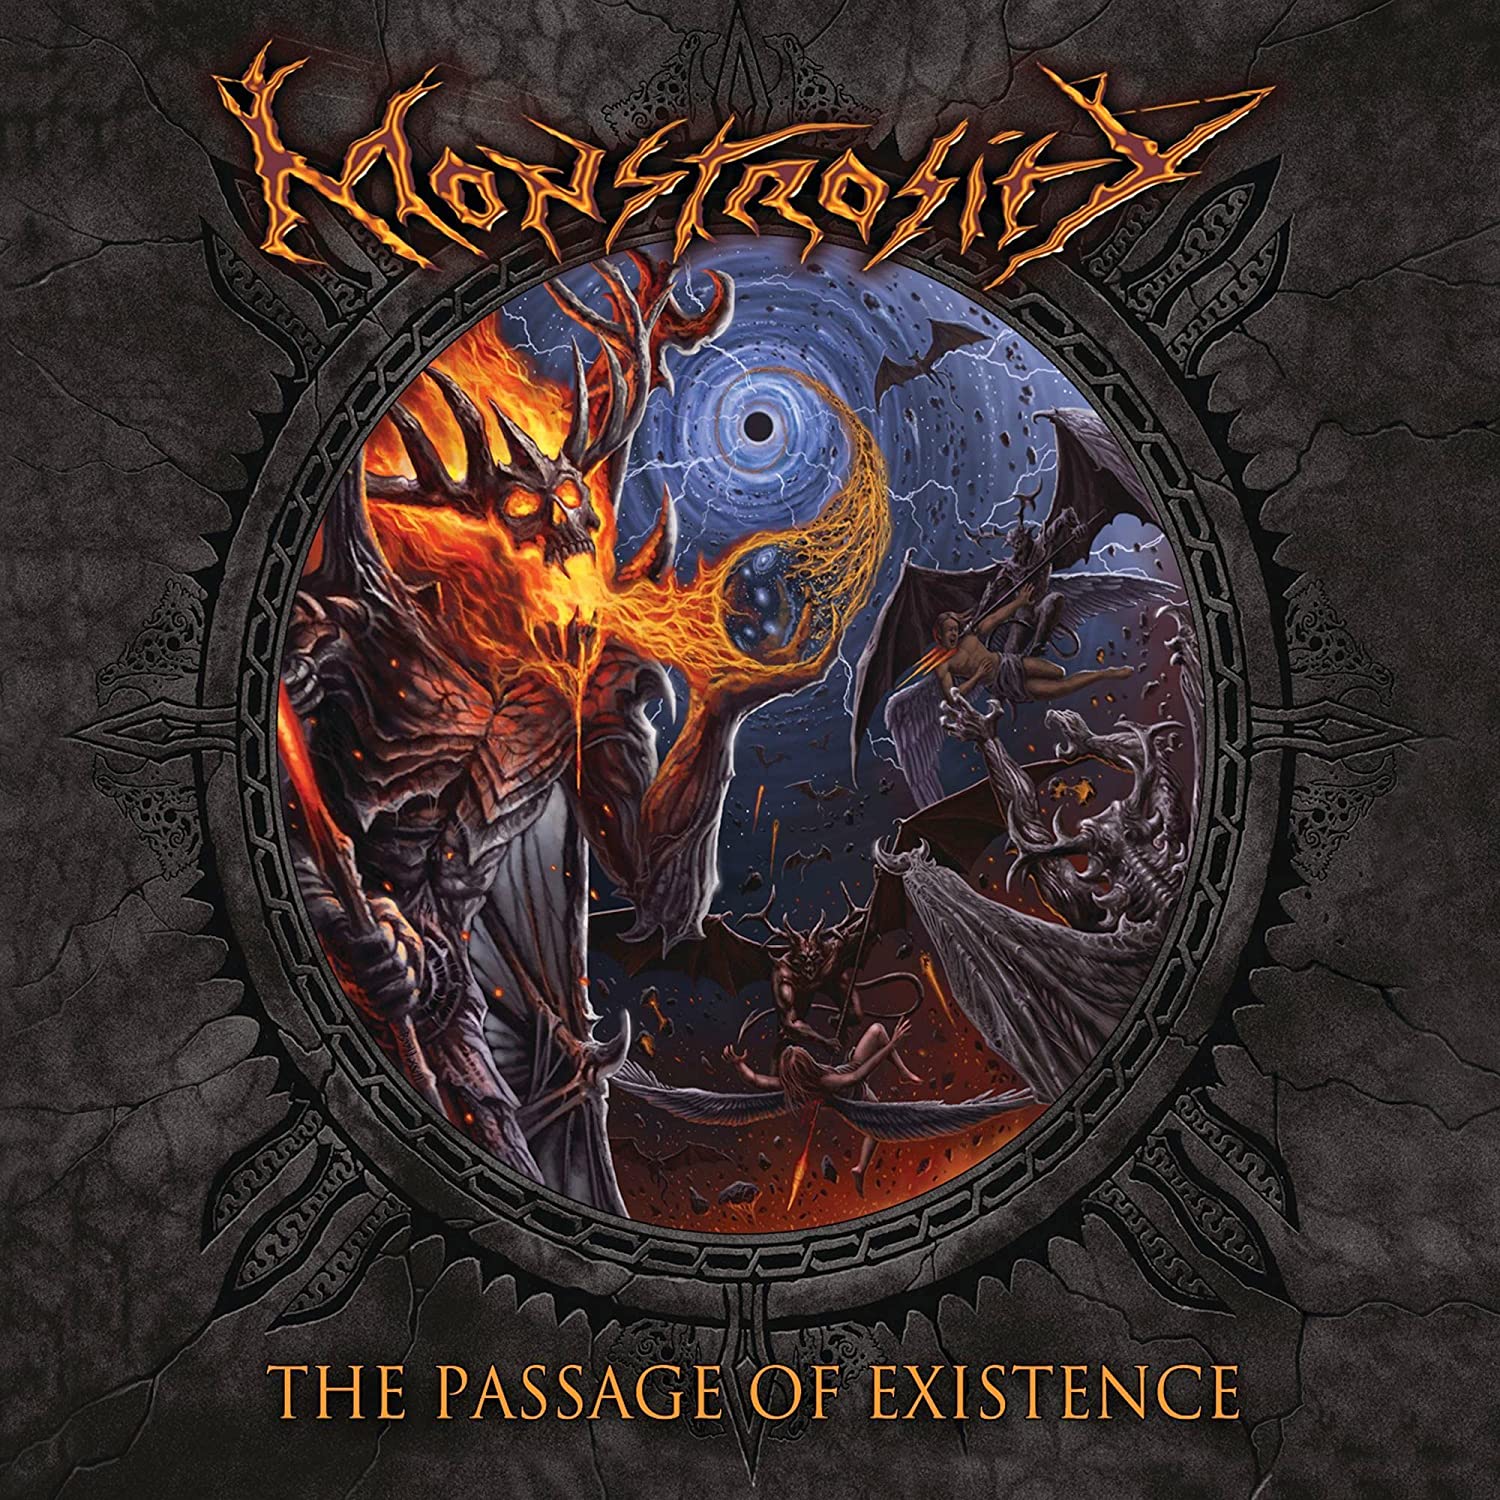 From the archives: Monstrosity- The Passage of Existence (September 2018)